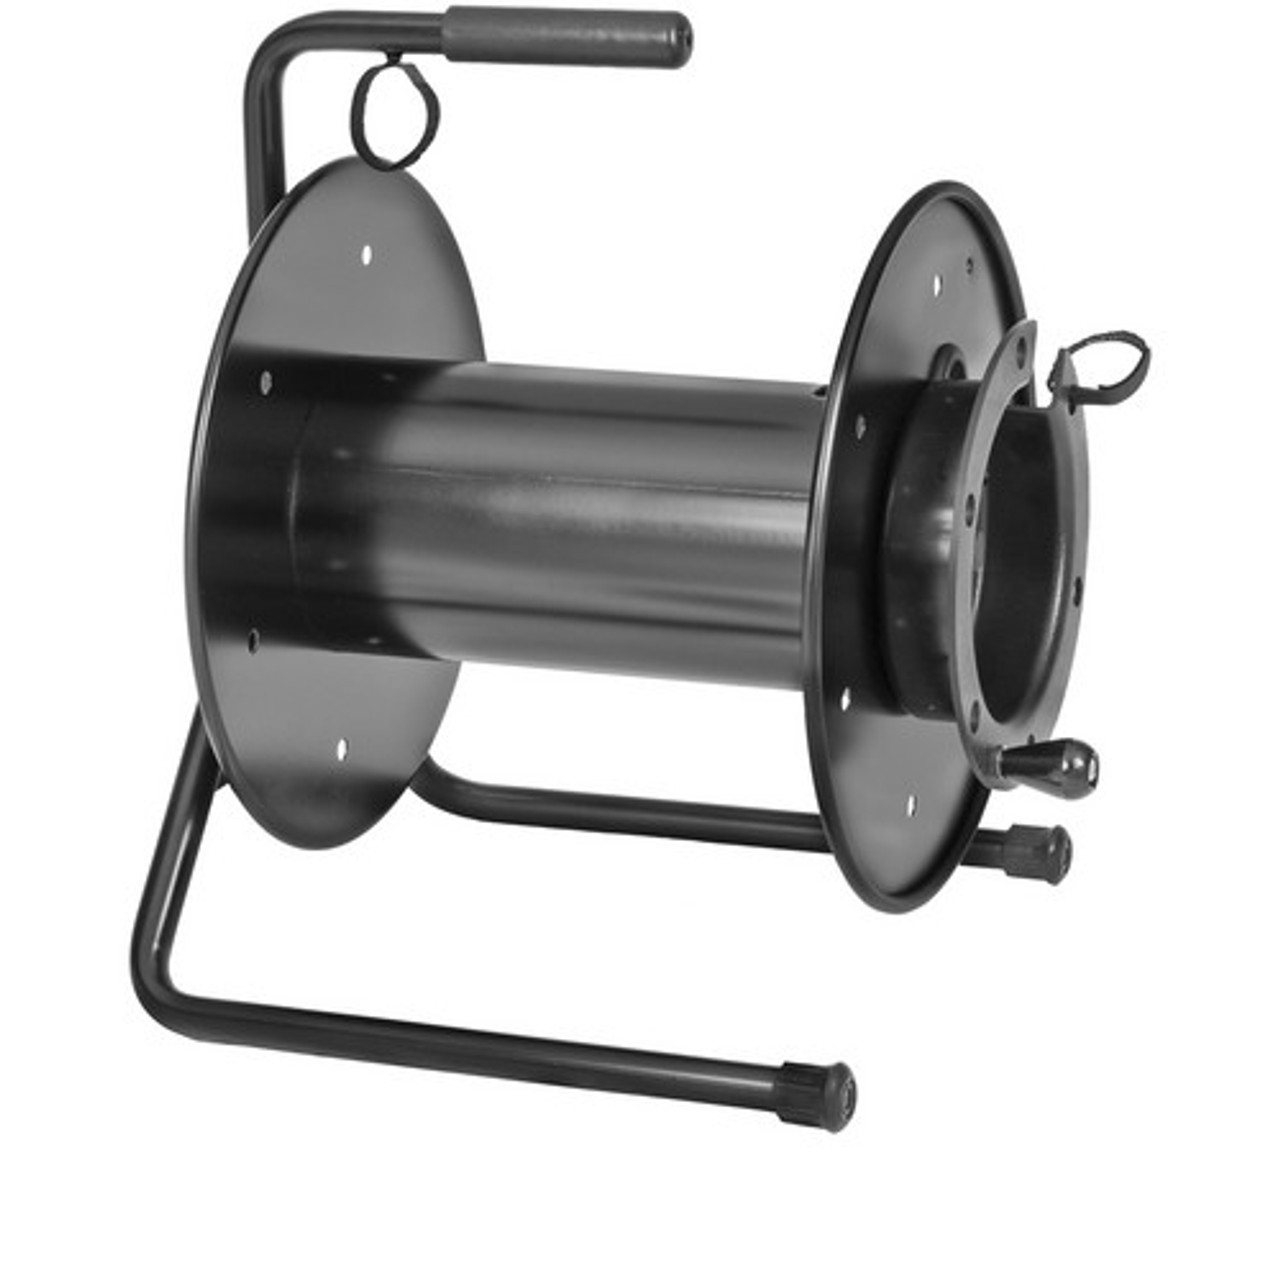 Hannay AVC20-14-16-DE Portable Cable Storage Reel with Drum